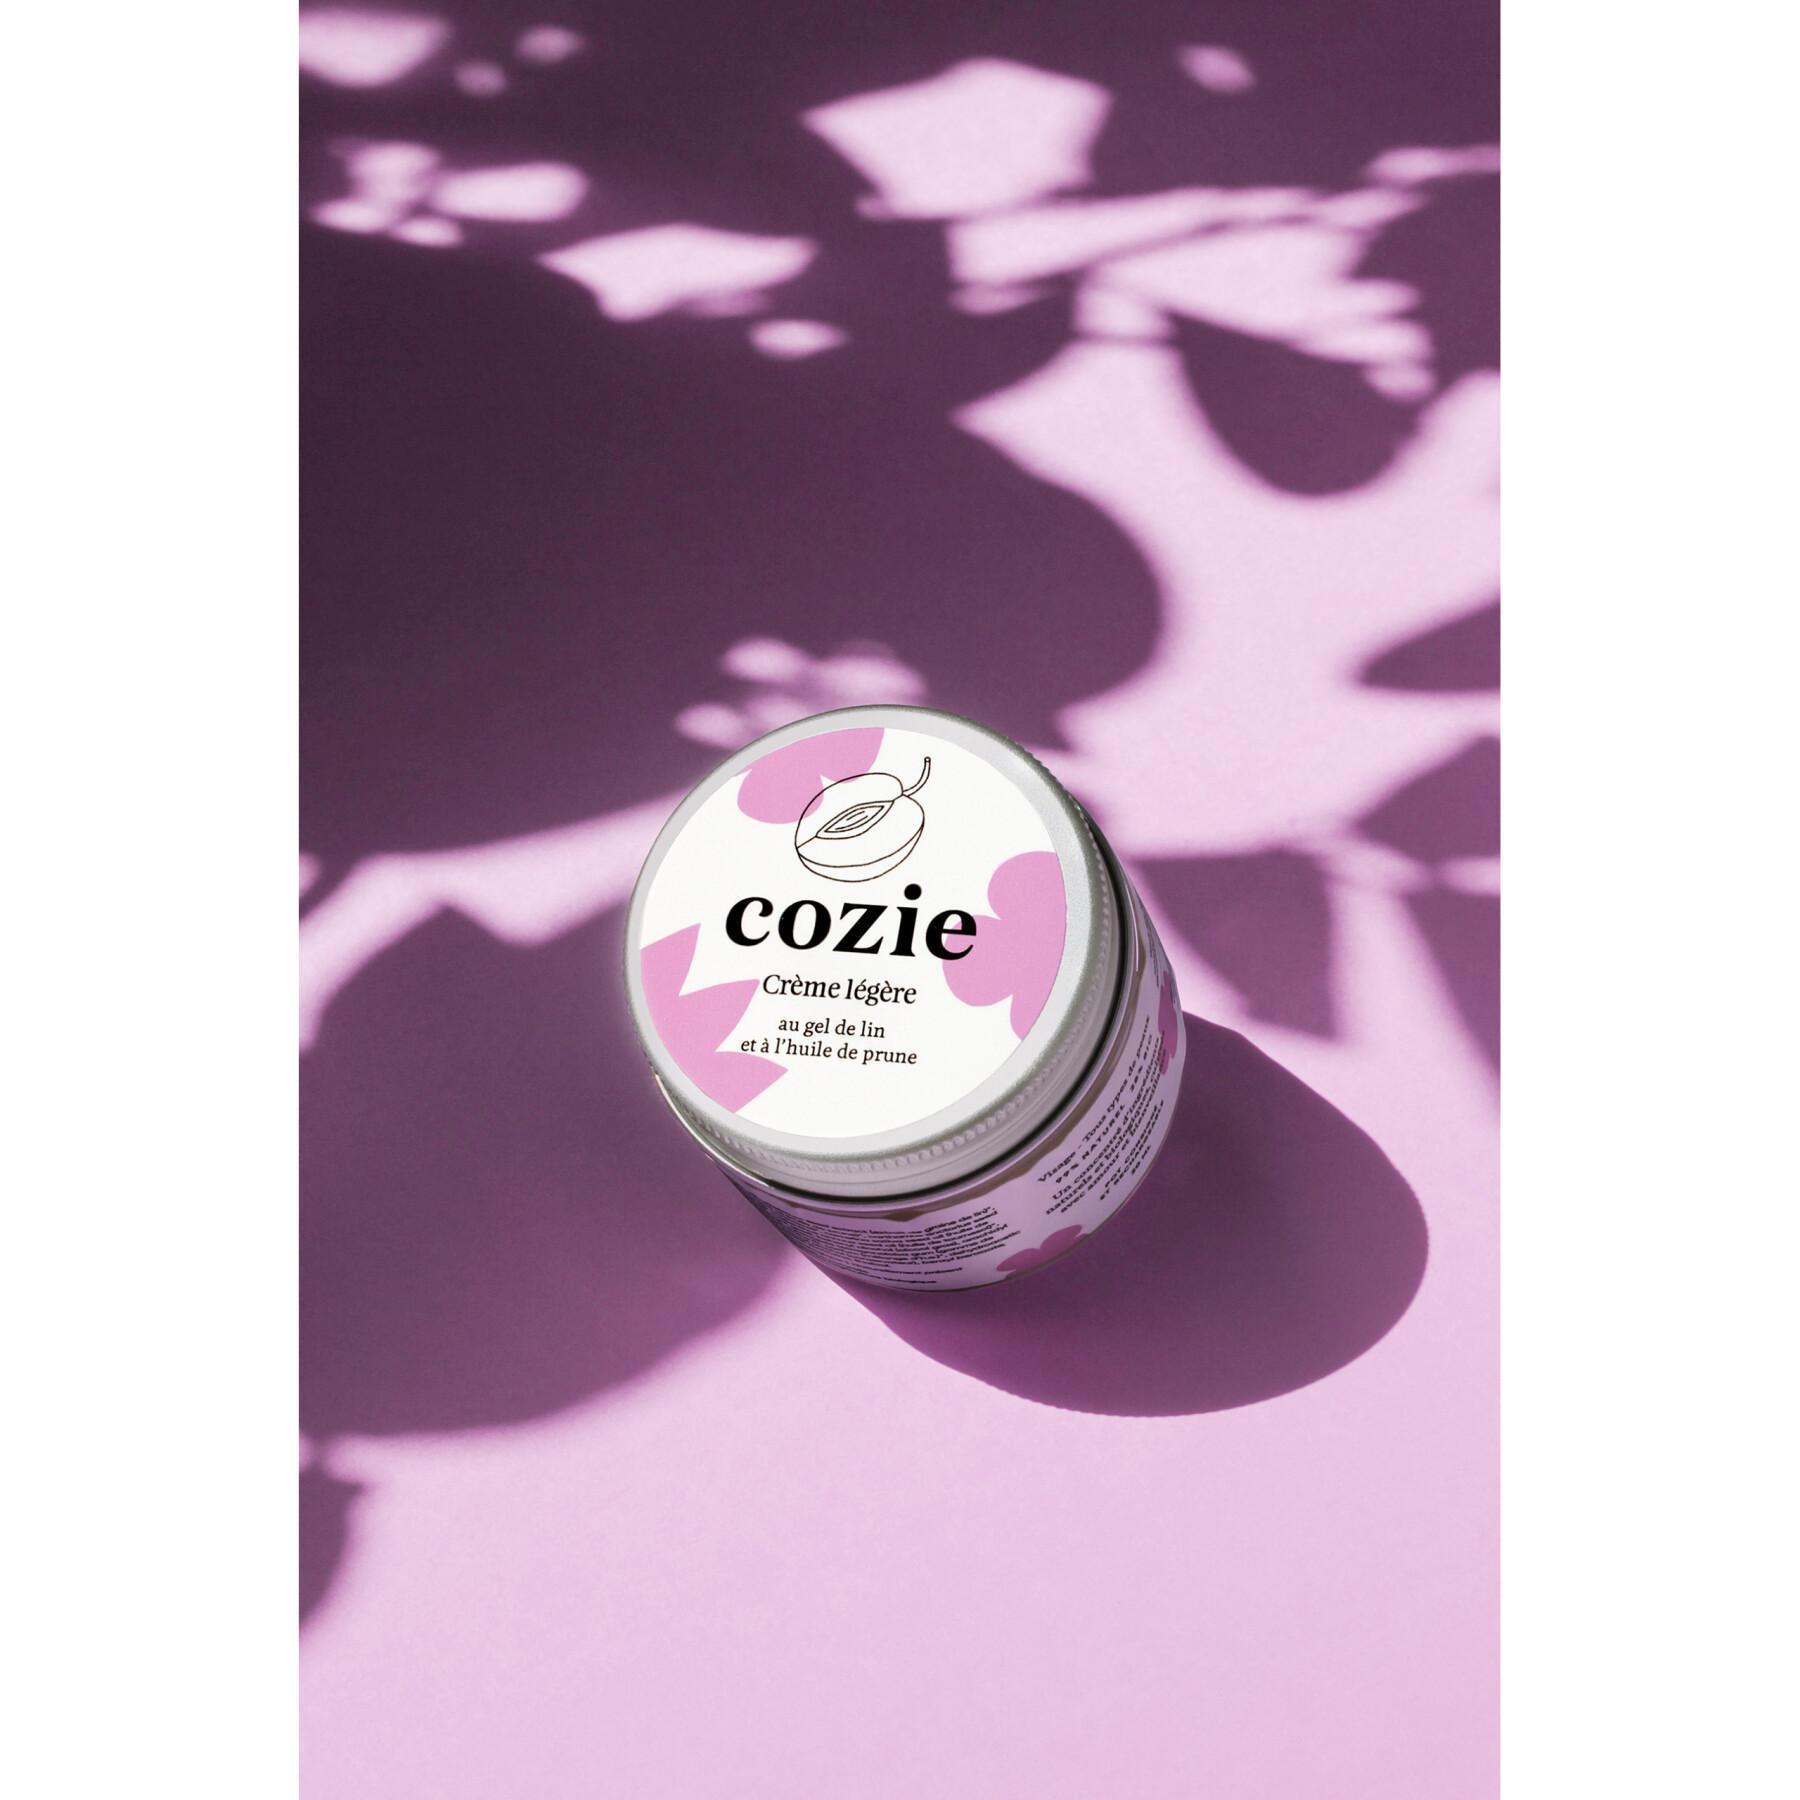 Light day cream with flax gel and plum oil Cozie 30ml